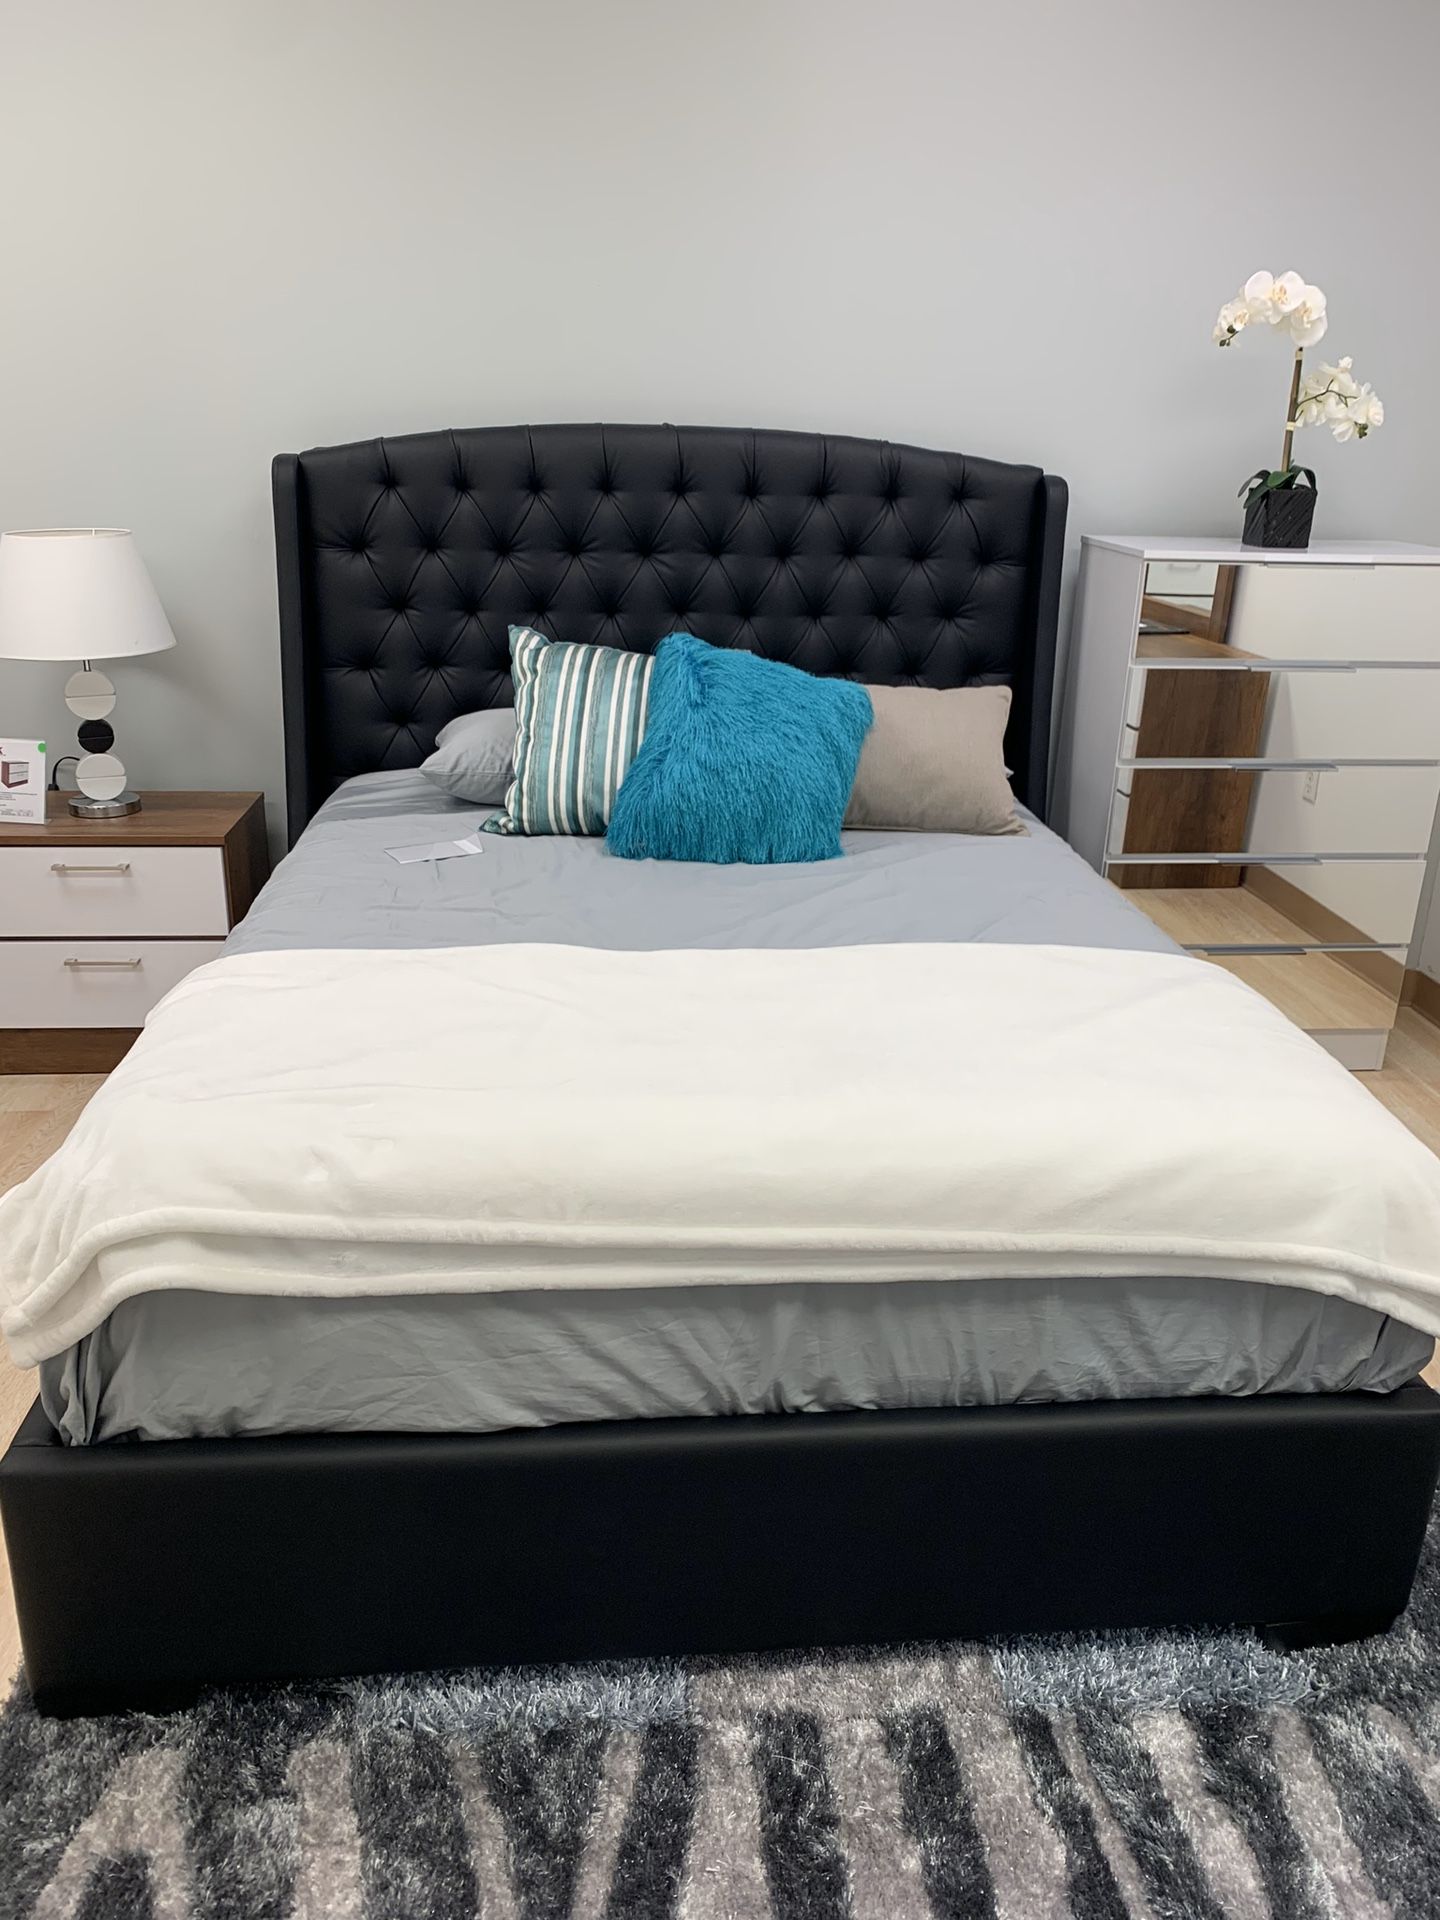 Queen bed // financing available only $49 down payment